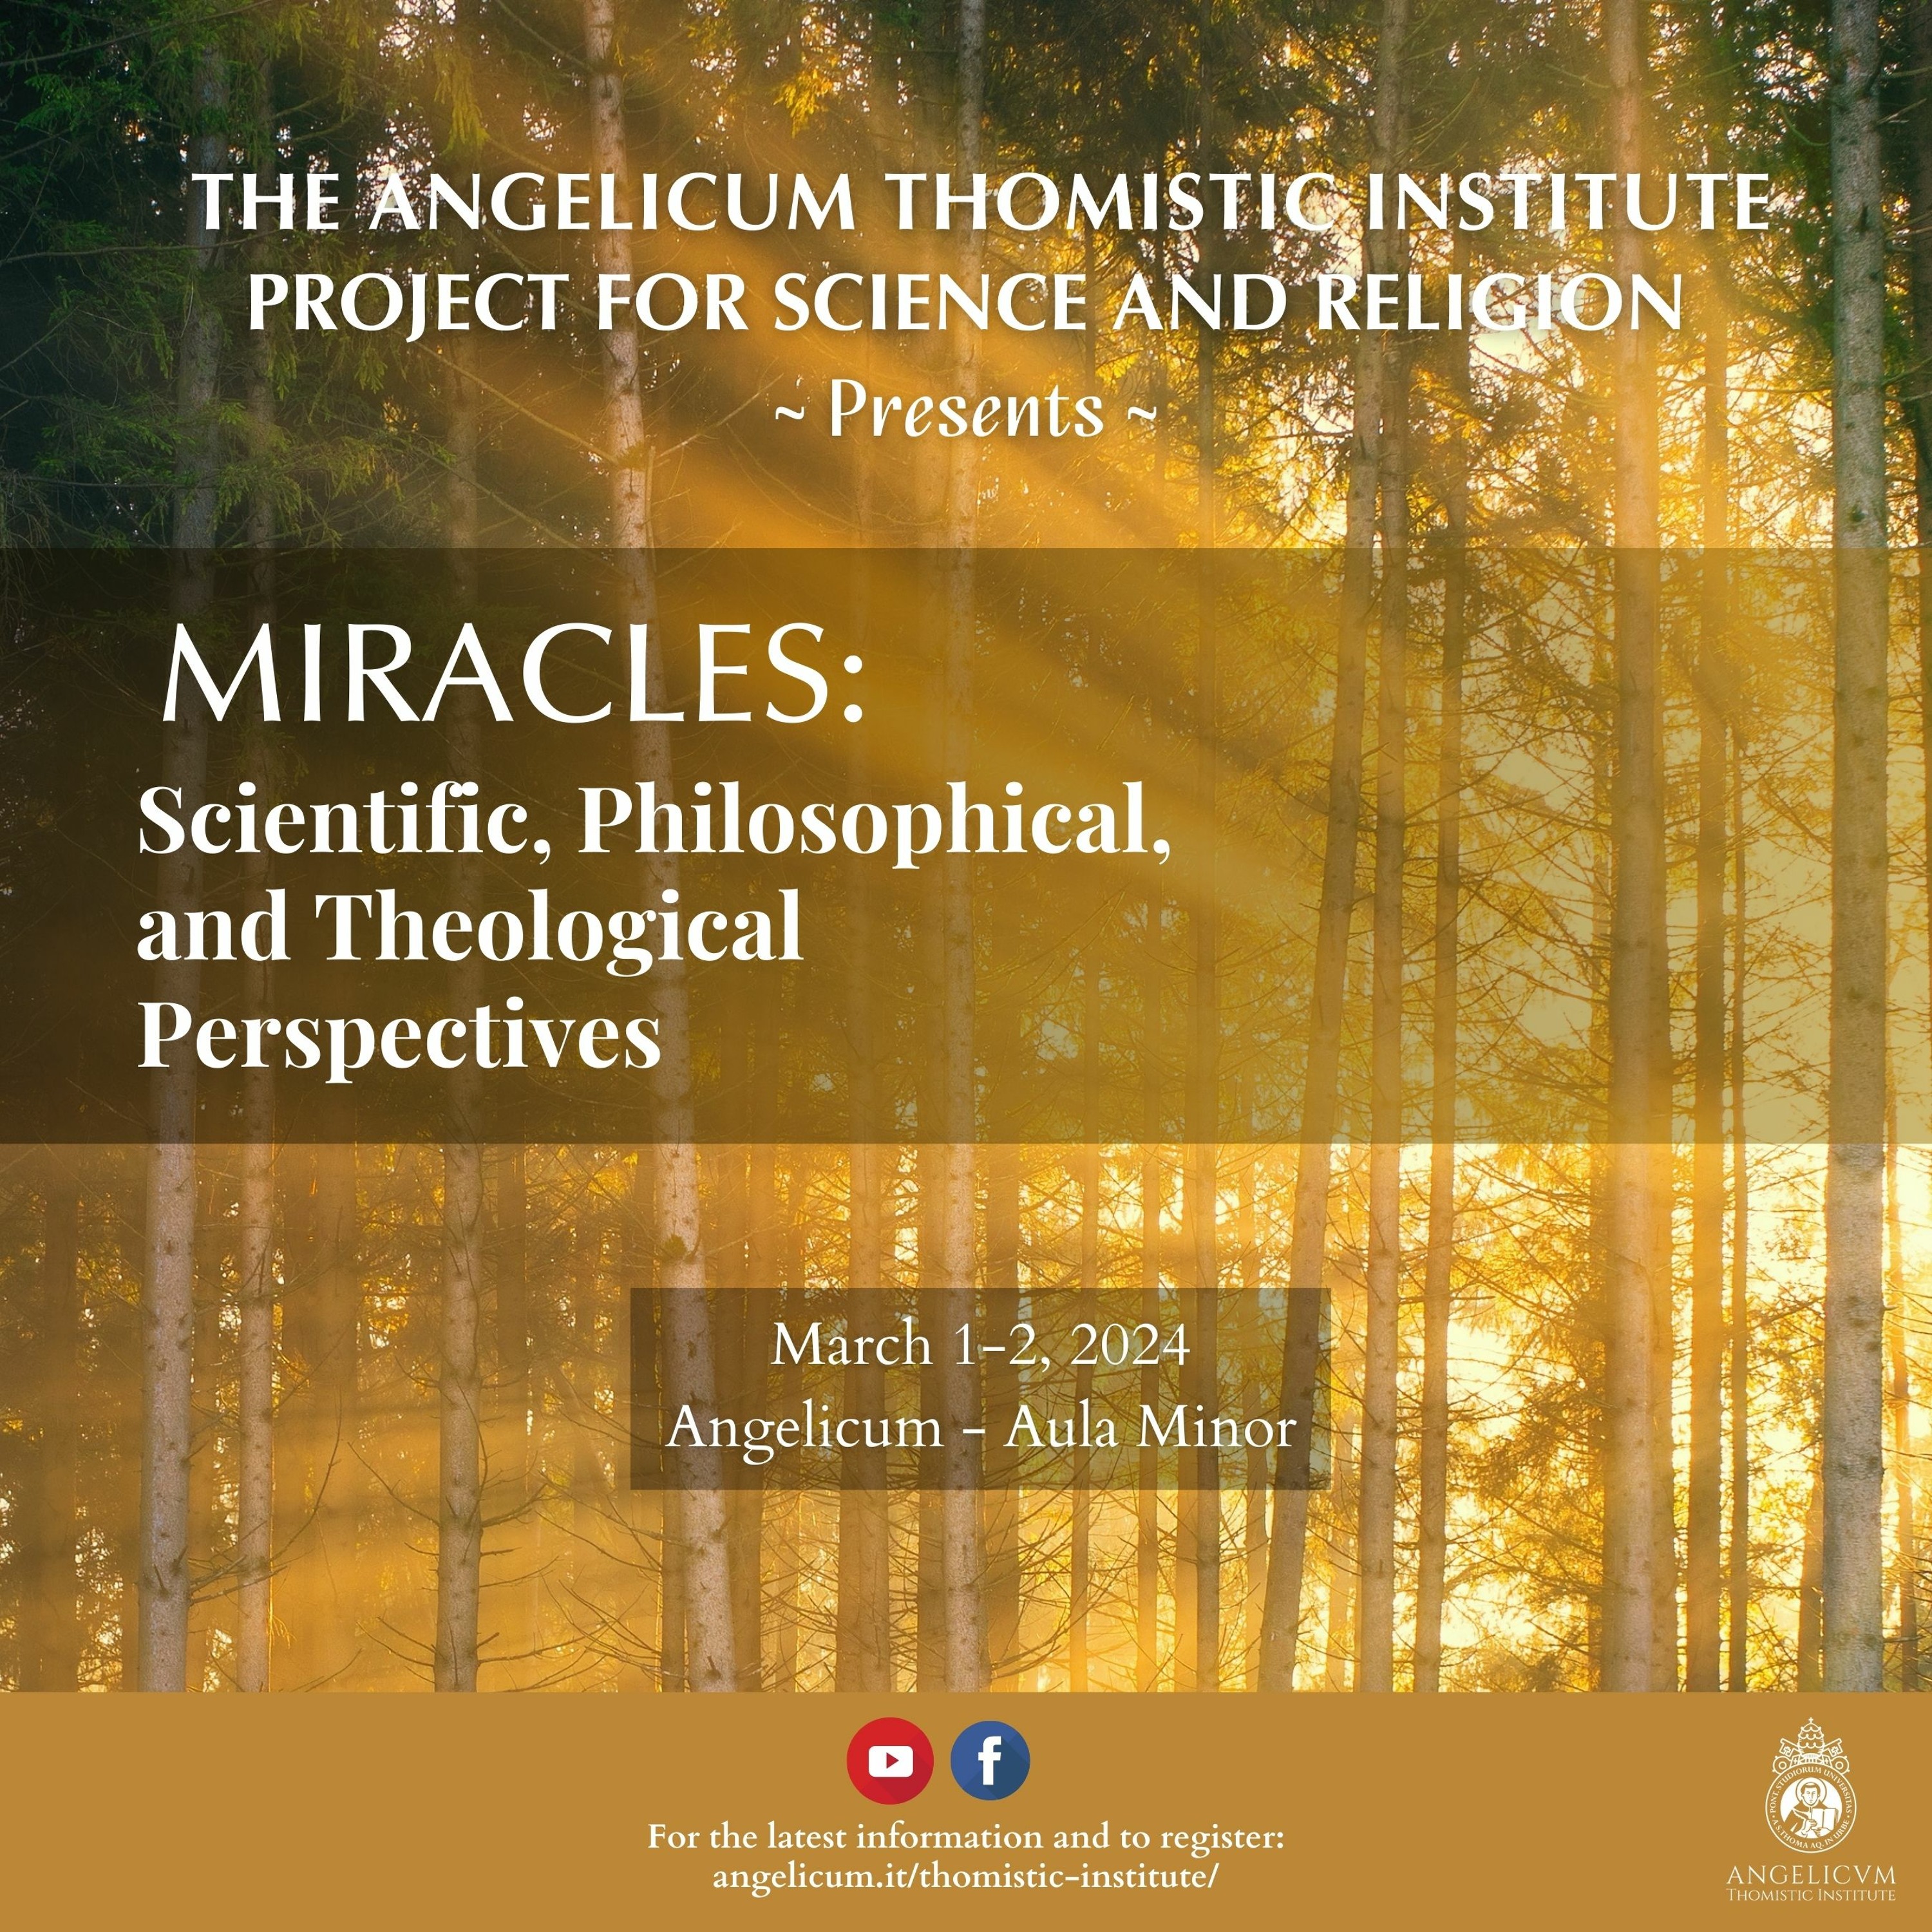 Human Flourishing And The Enigma Of Biblical Miracles | Justin Schembri, OP